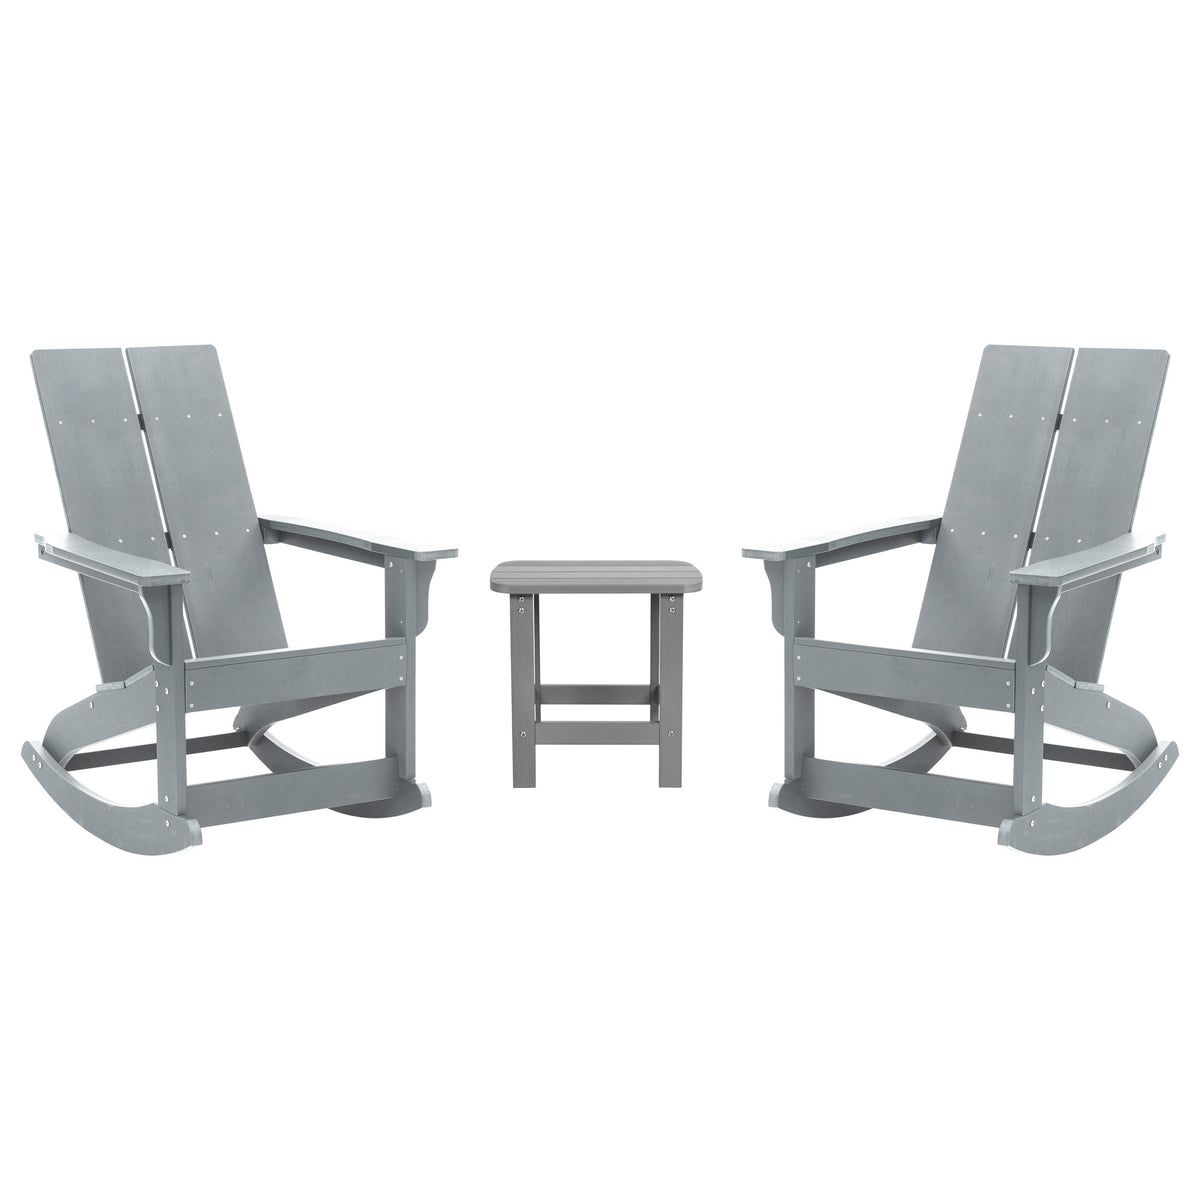 Gray |#| 2 Gray Modern Dual Slat Poly Resin Adirondack Rocking Chairs with 1 Side Table